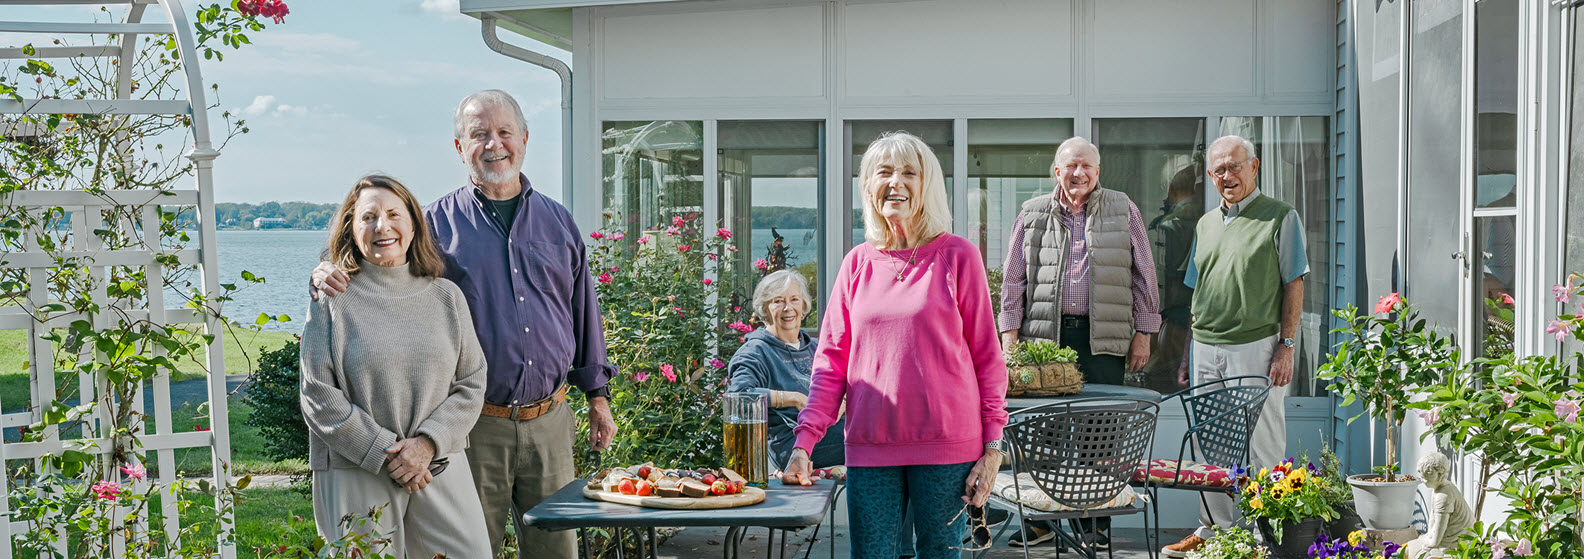 three senior couples stand on flagstone cottage patio enjoying desserts and ice tea surrounded by roses, flower pots with patuxent river in background